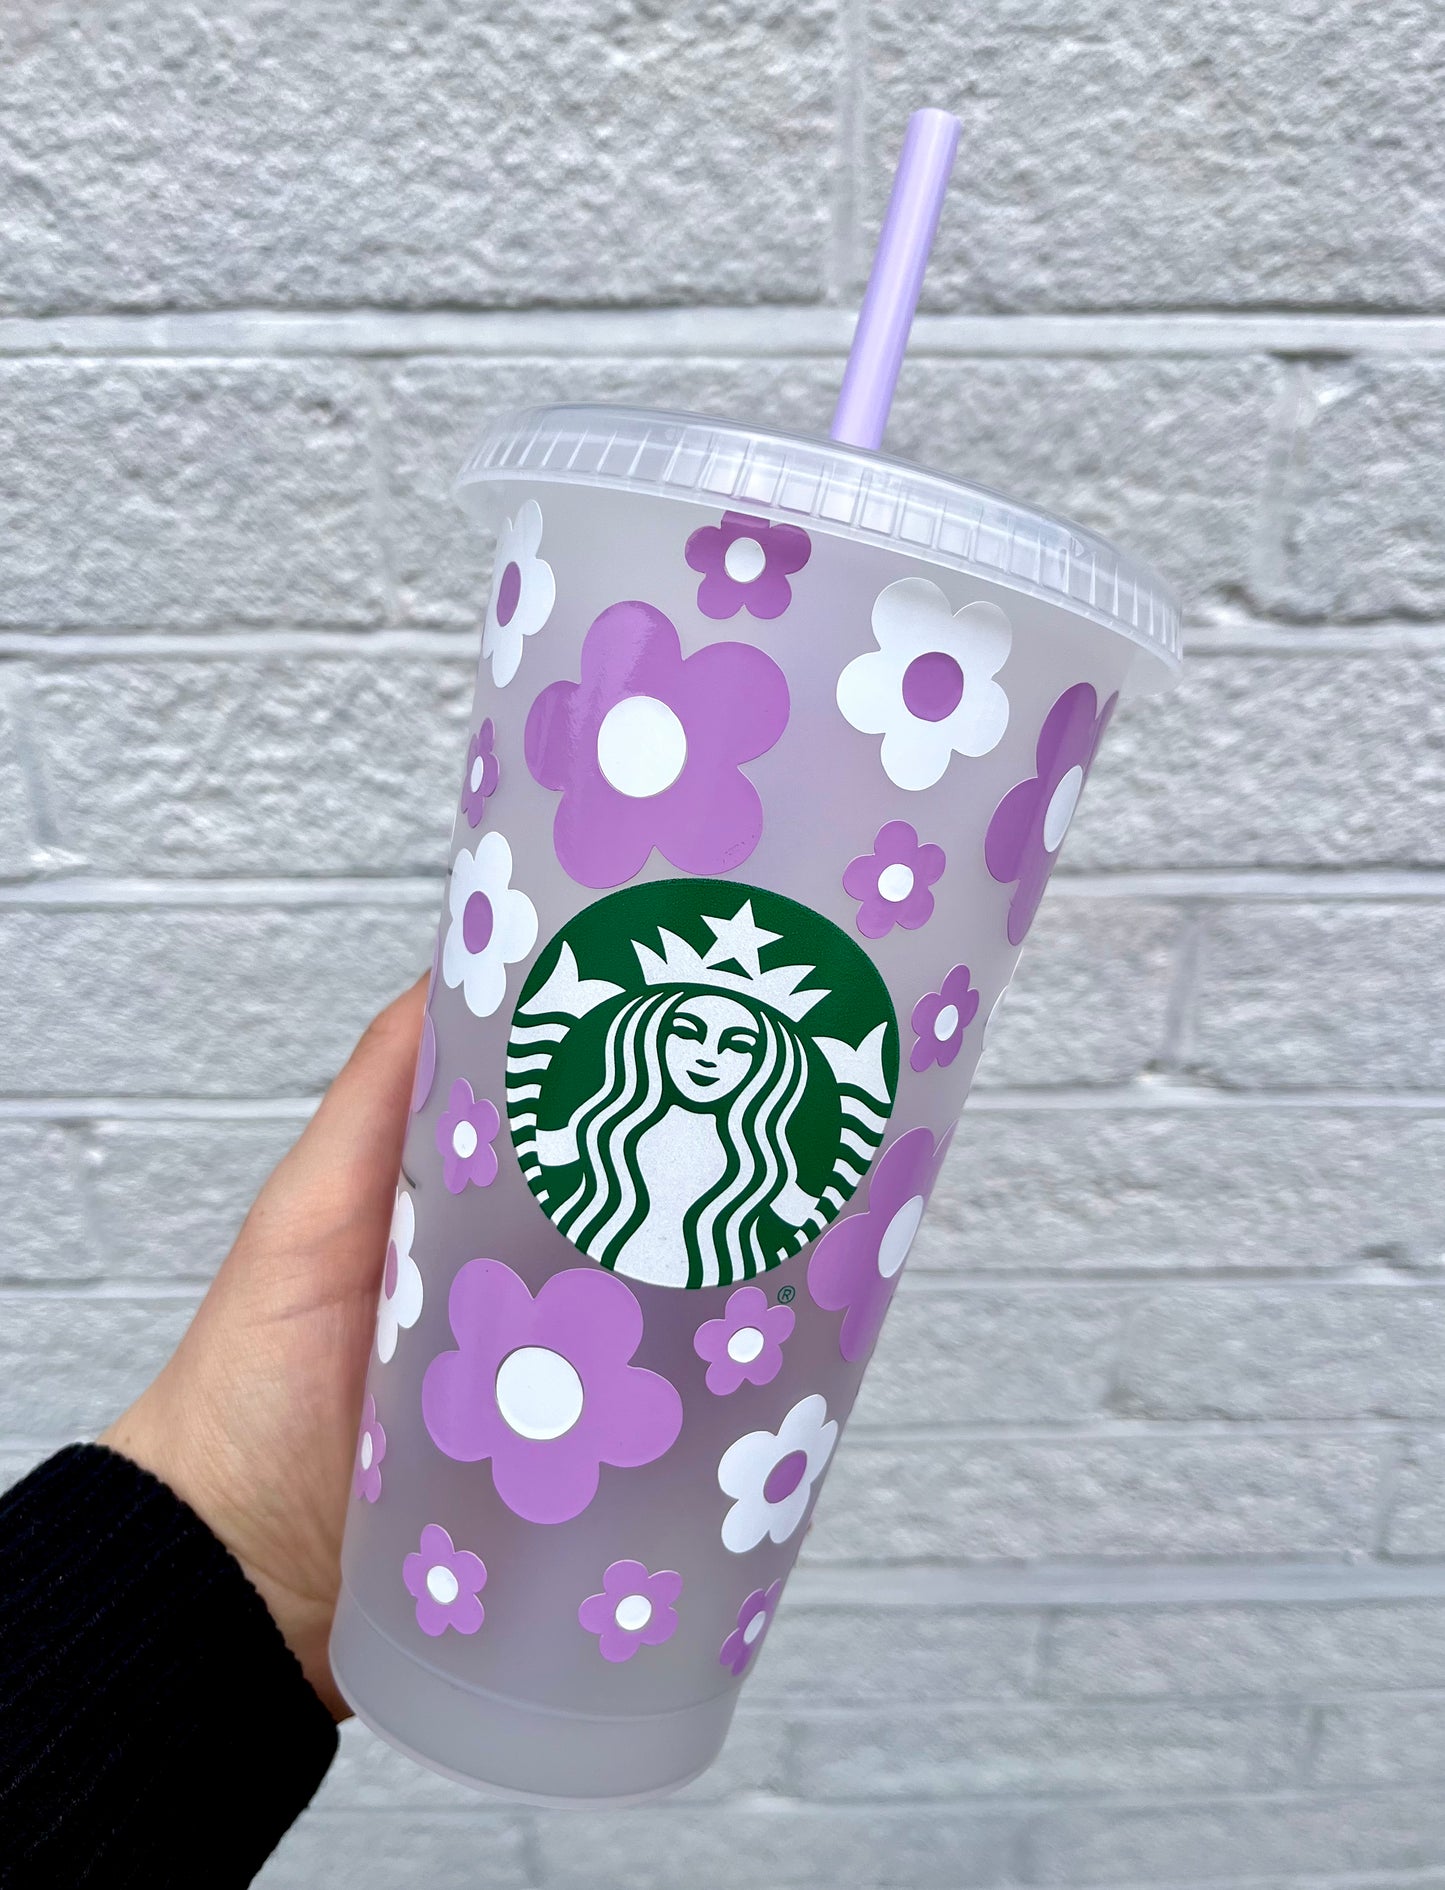 Starbucks Cold Cup With Retro Flowers Design